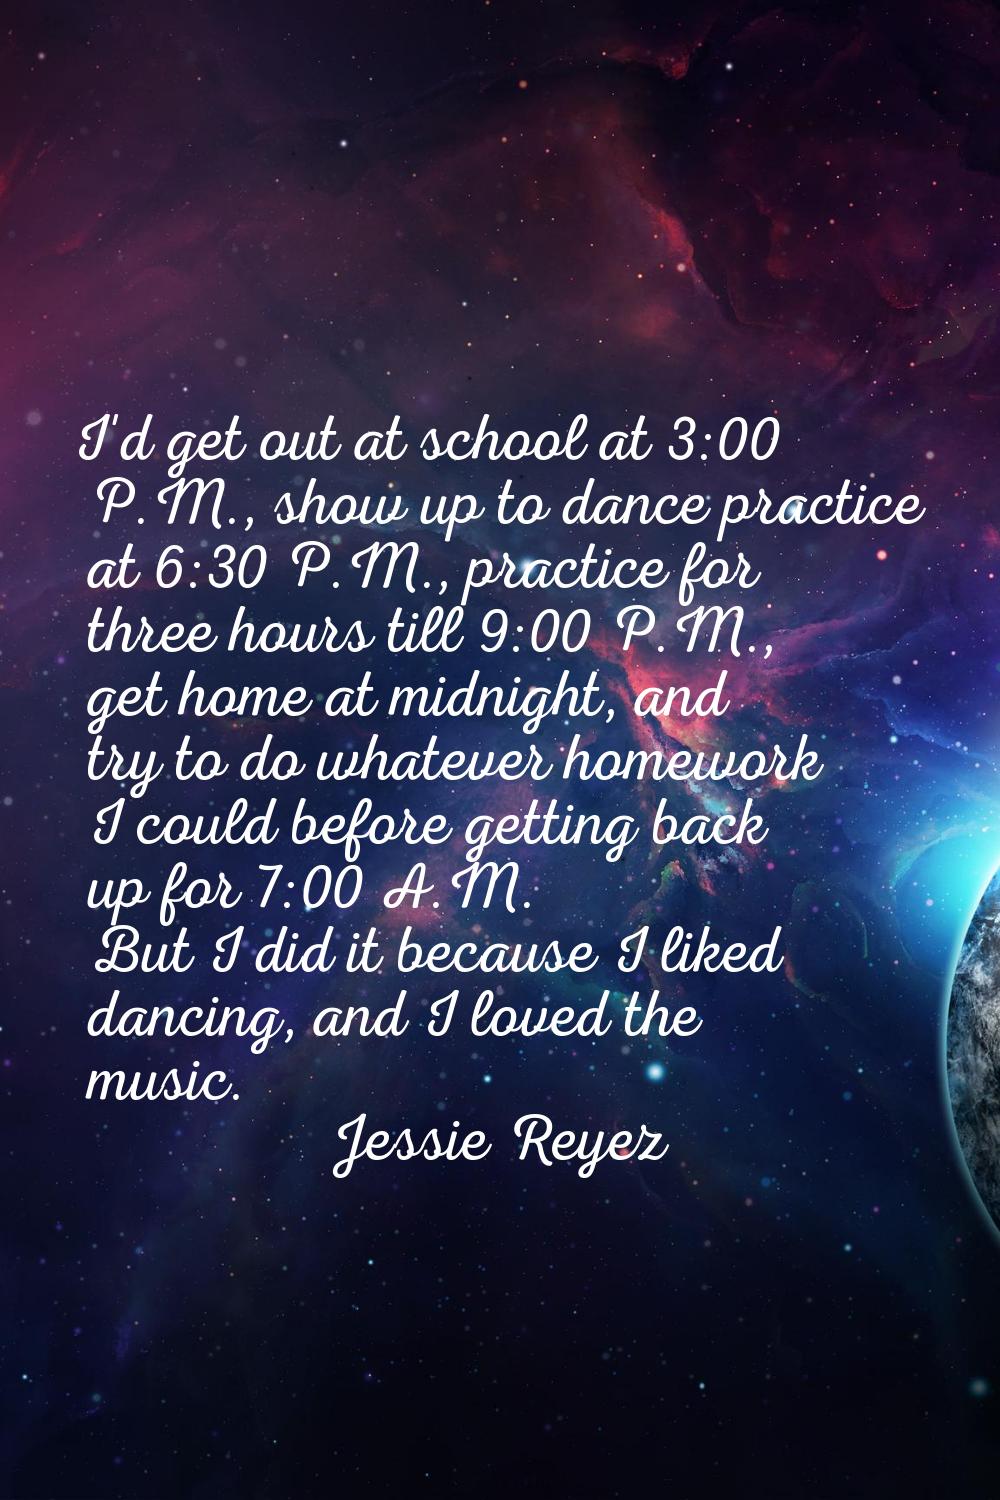 I'd get out at school at 3:00 P.M., show up to dance practice at 6:30 P.M., practice for three hour